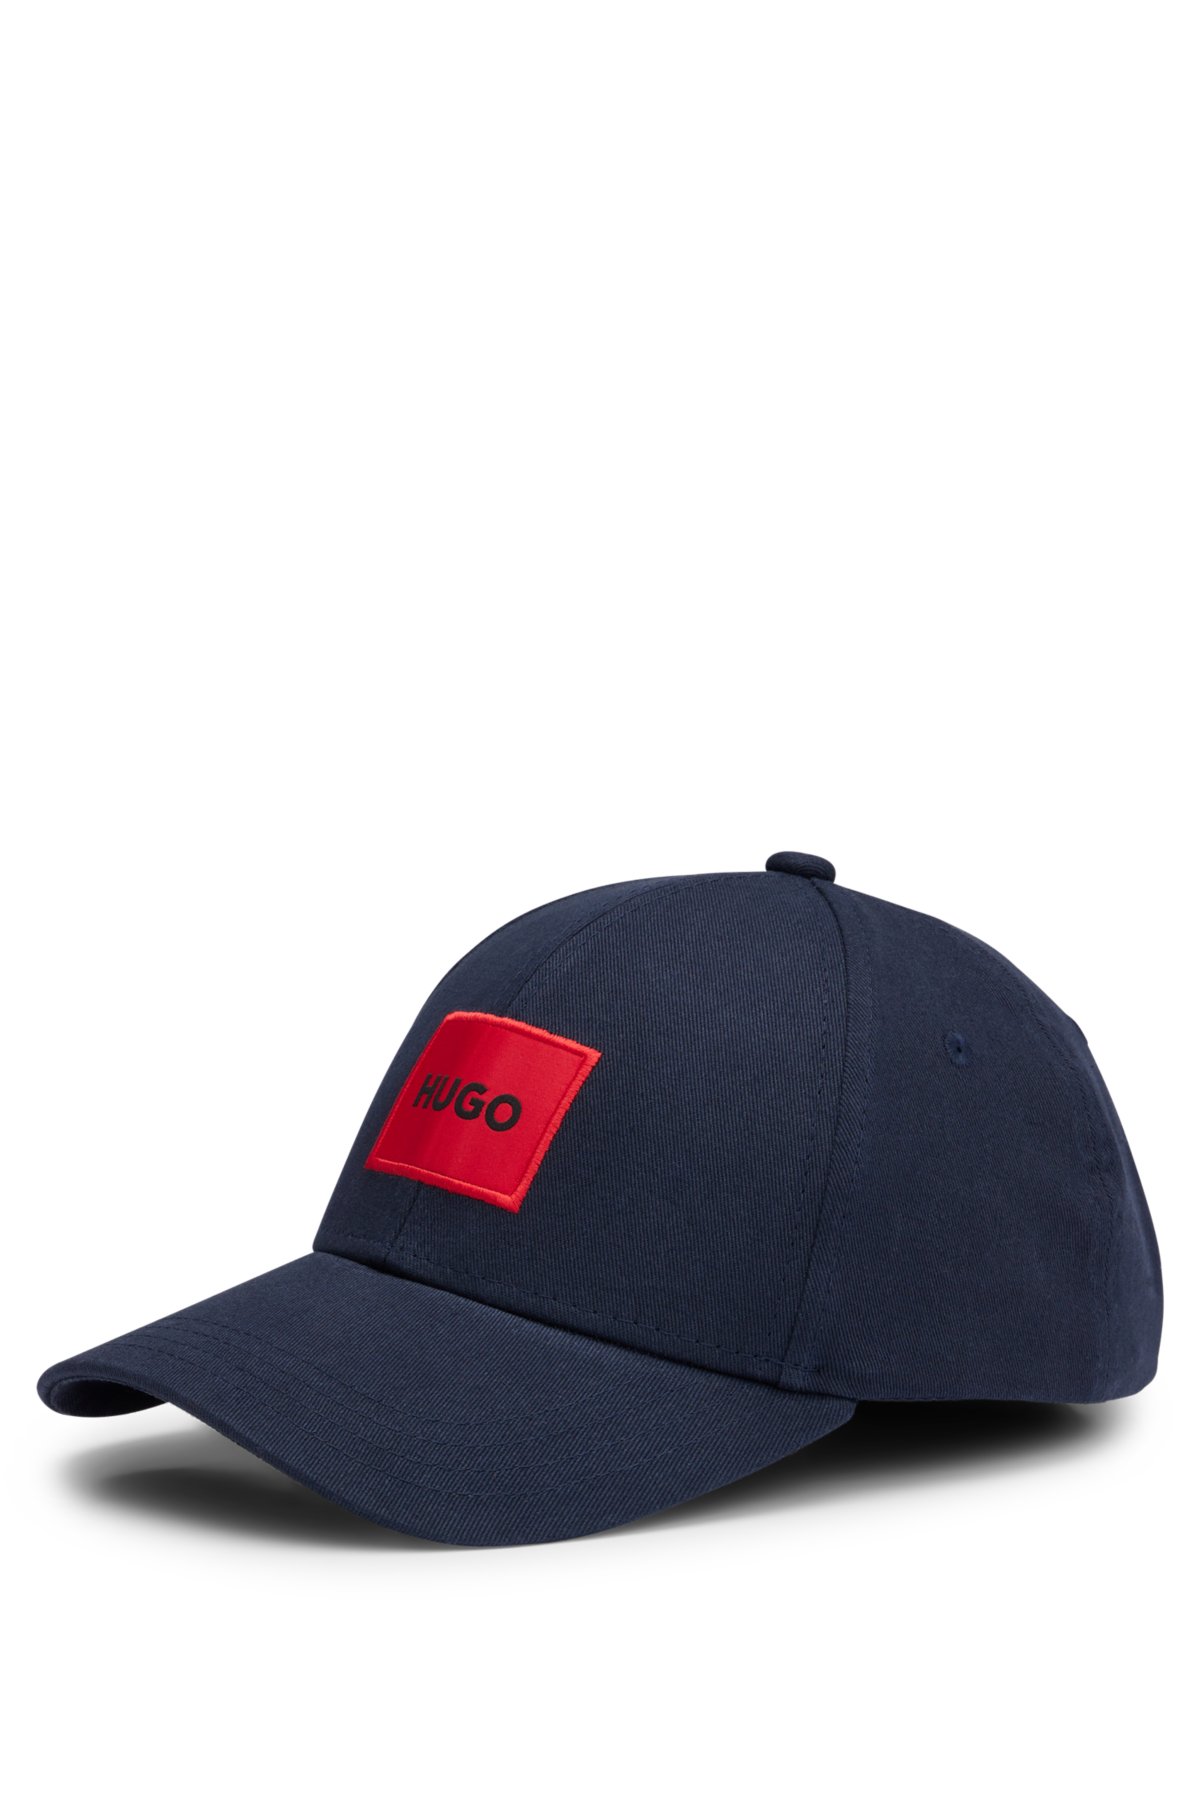 Cotton-twill with HUGO cap - red logo label